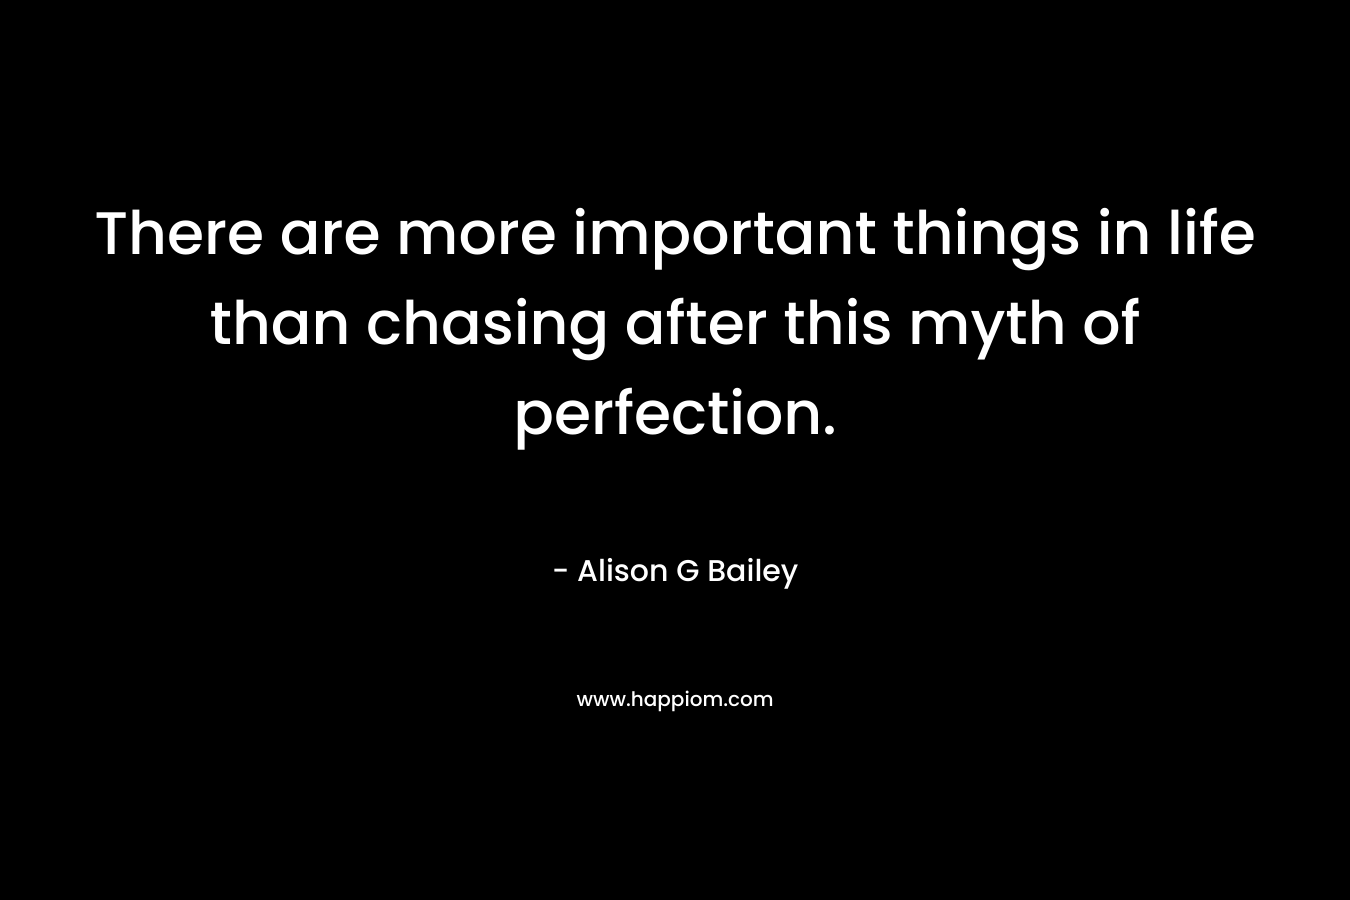 There are more important things in life than chasing after this myth of perfection.